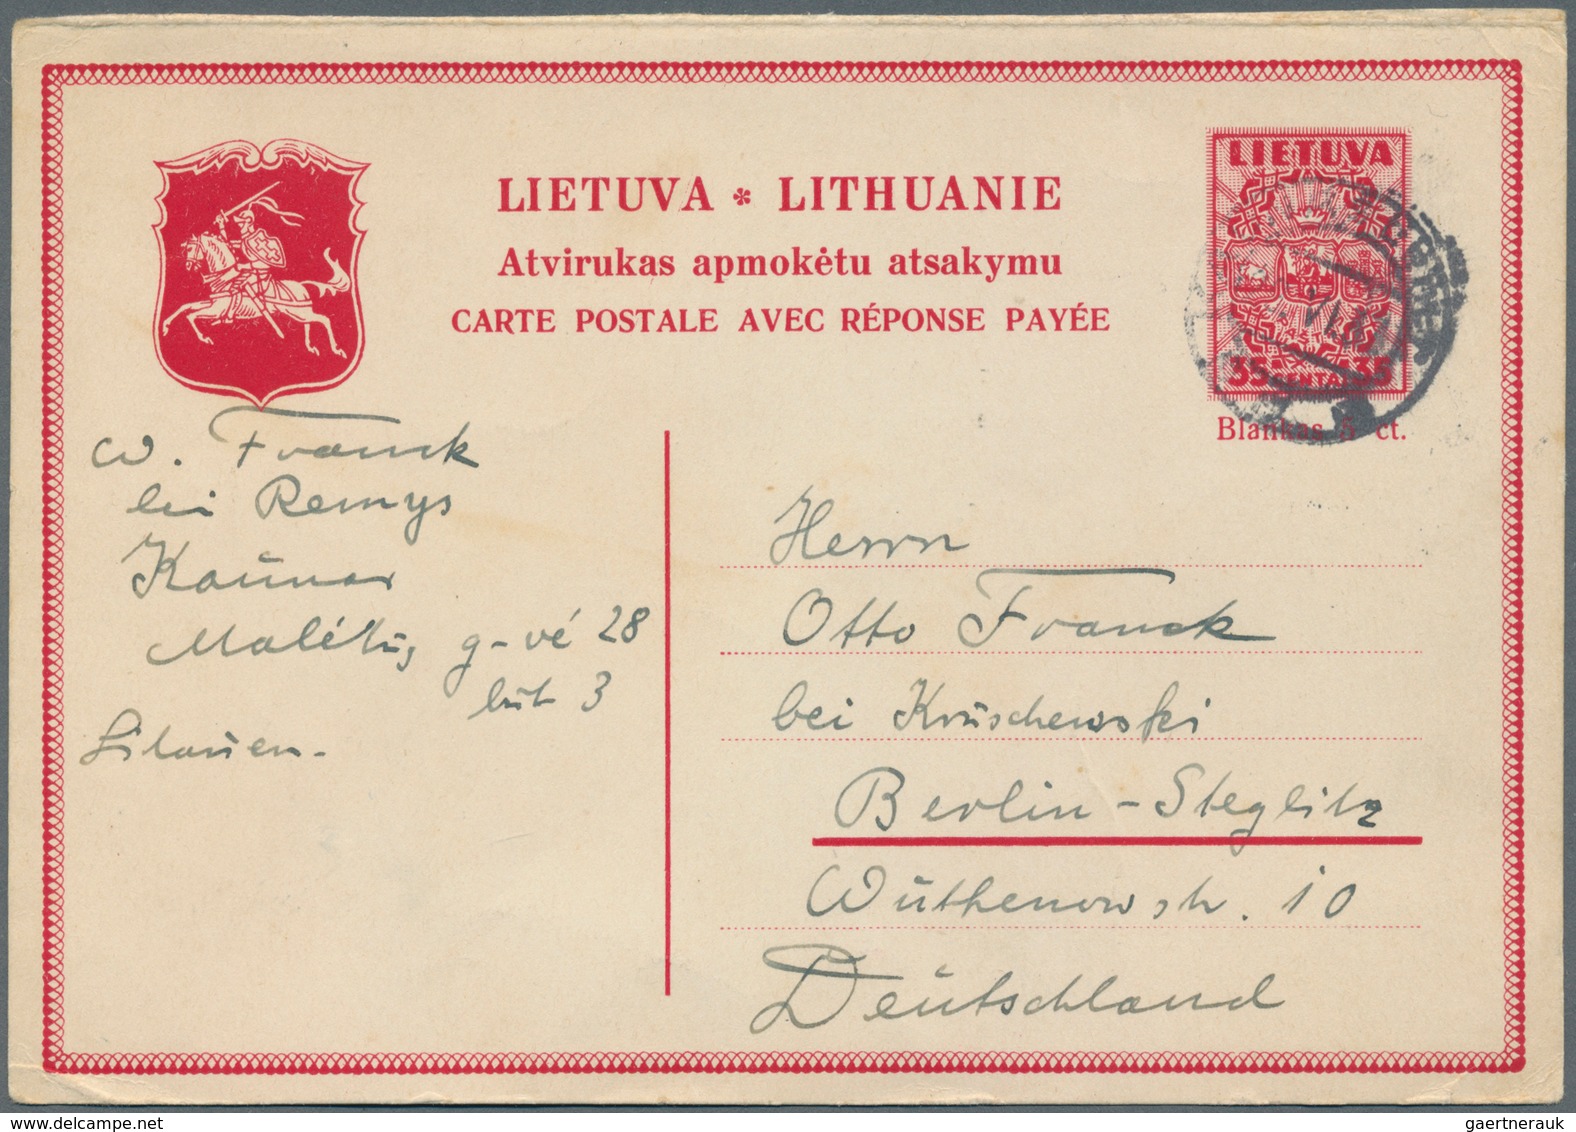 Litauen - Ganzsachen: 1937 Postal Stationery Card 35 Centai Red Commercially Used From Kaunas To Ber - Lituania